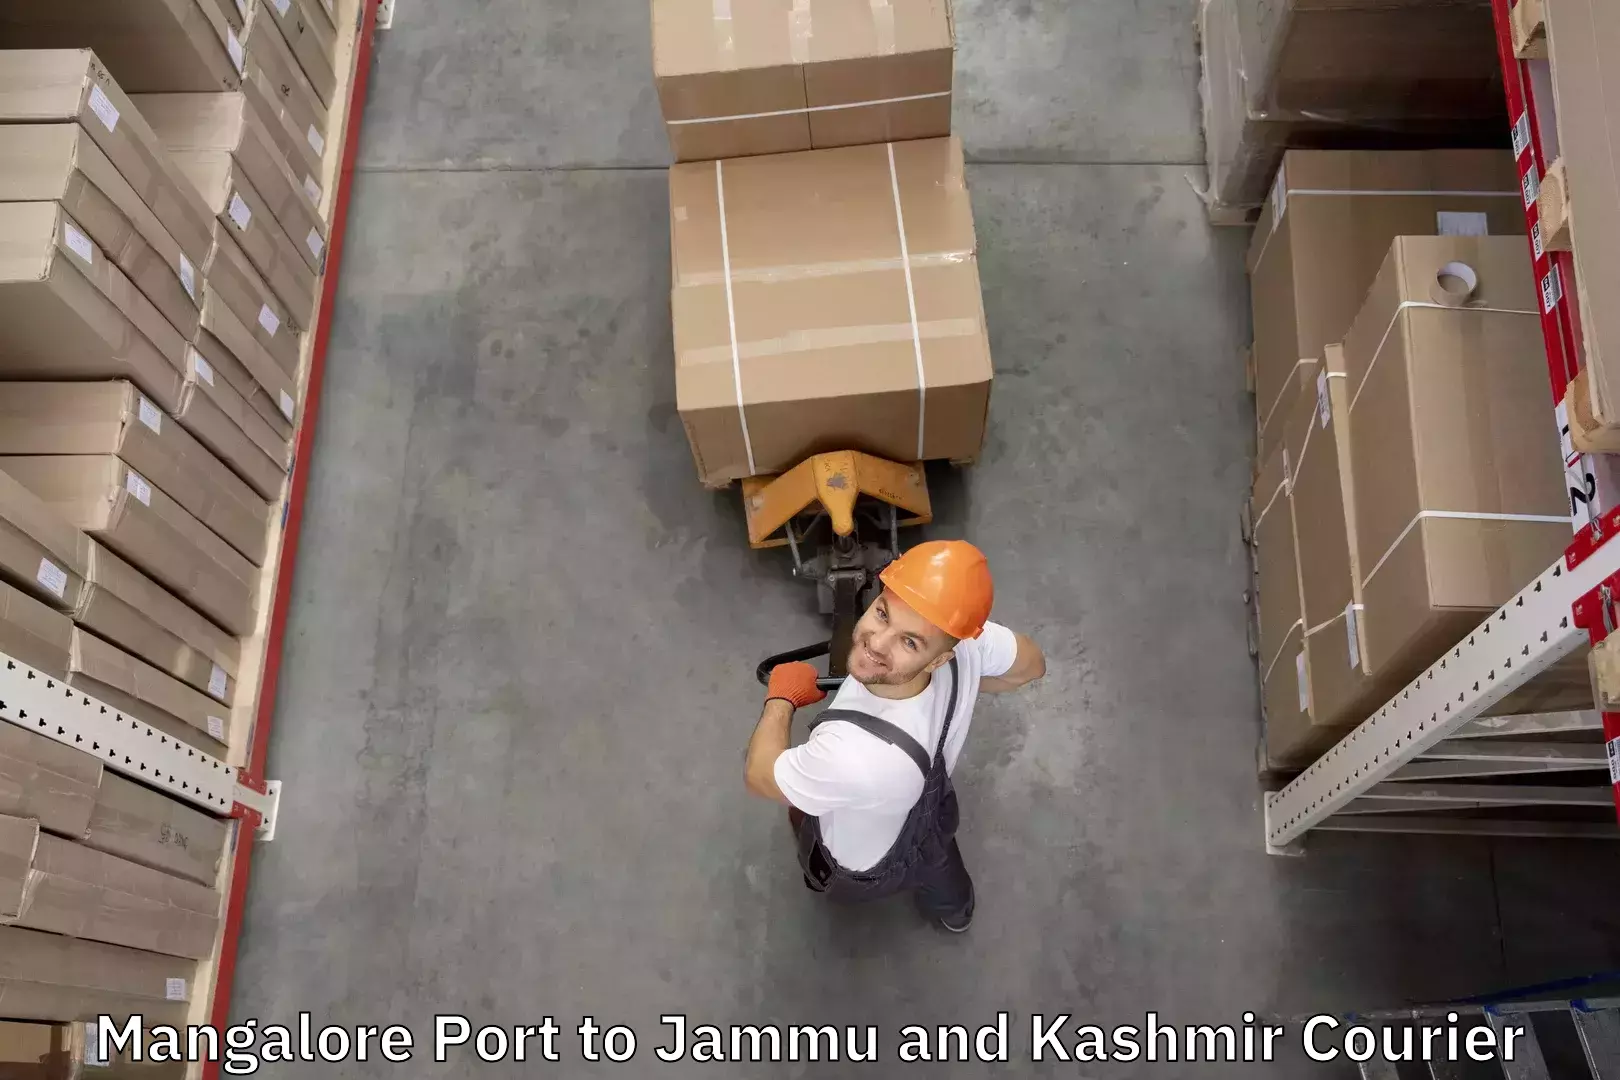 Baggage transport services in Mangalore Port to Bhaderwah